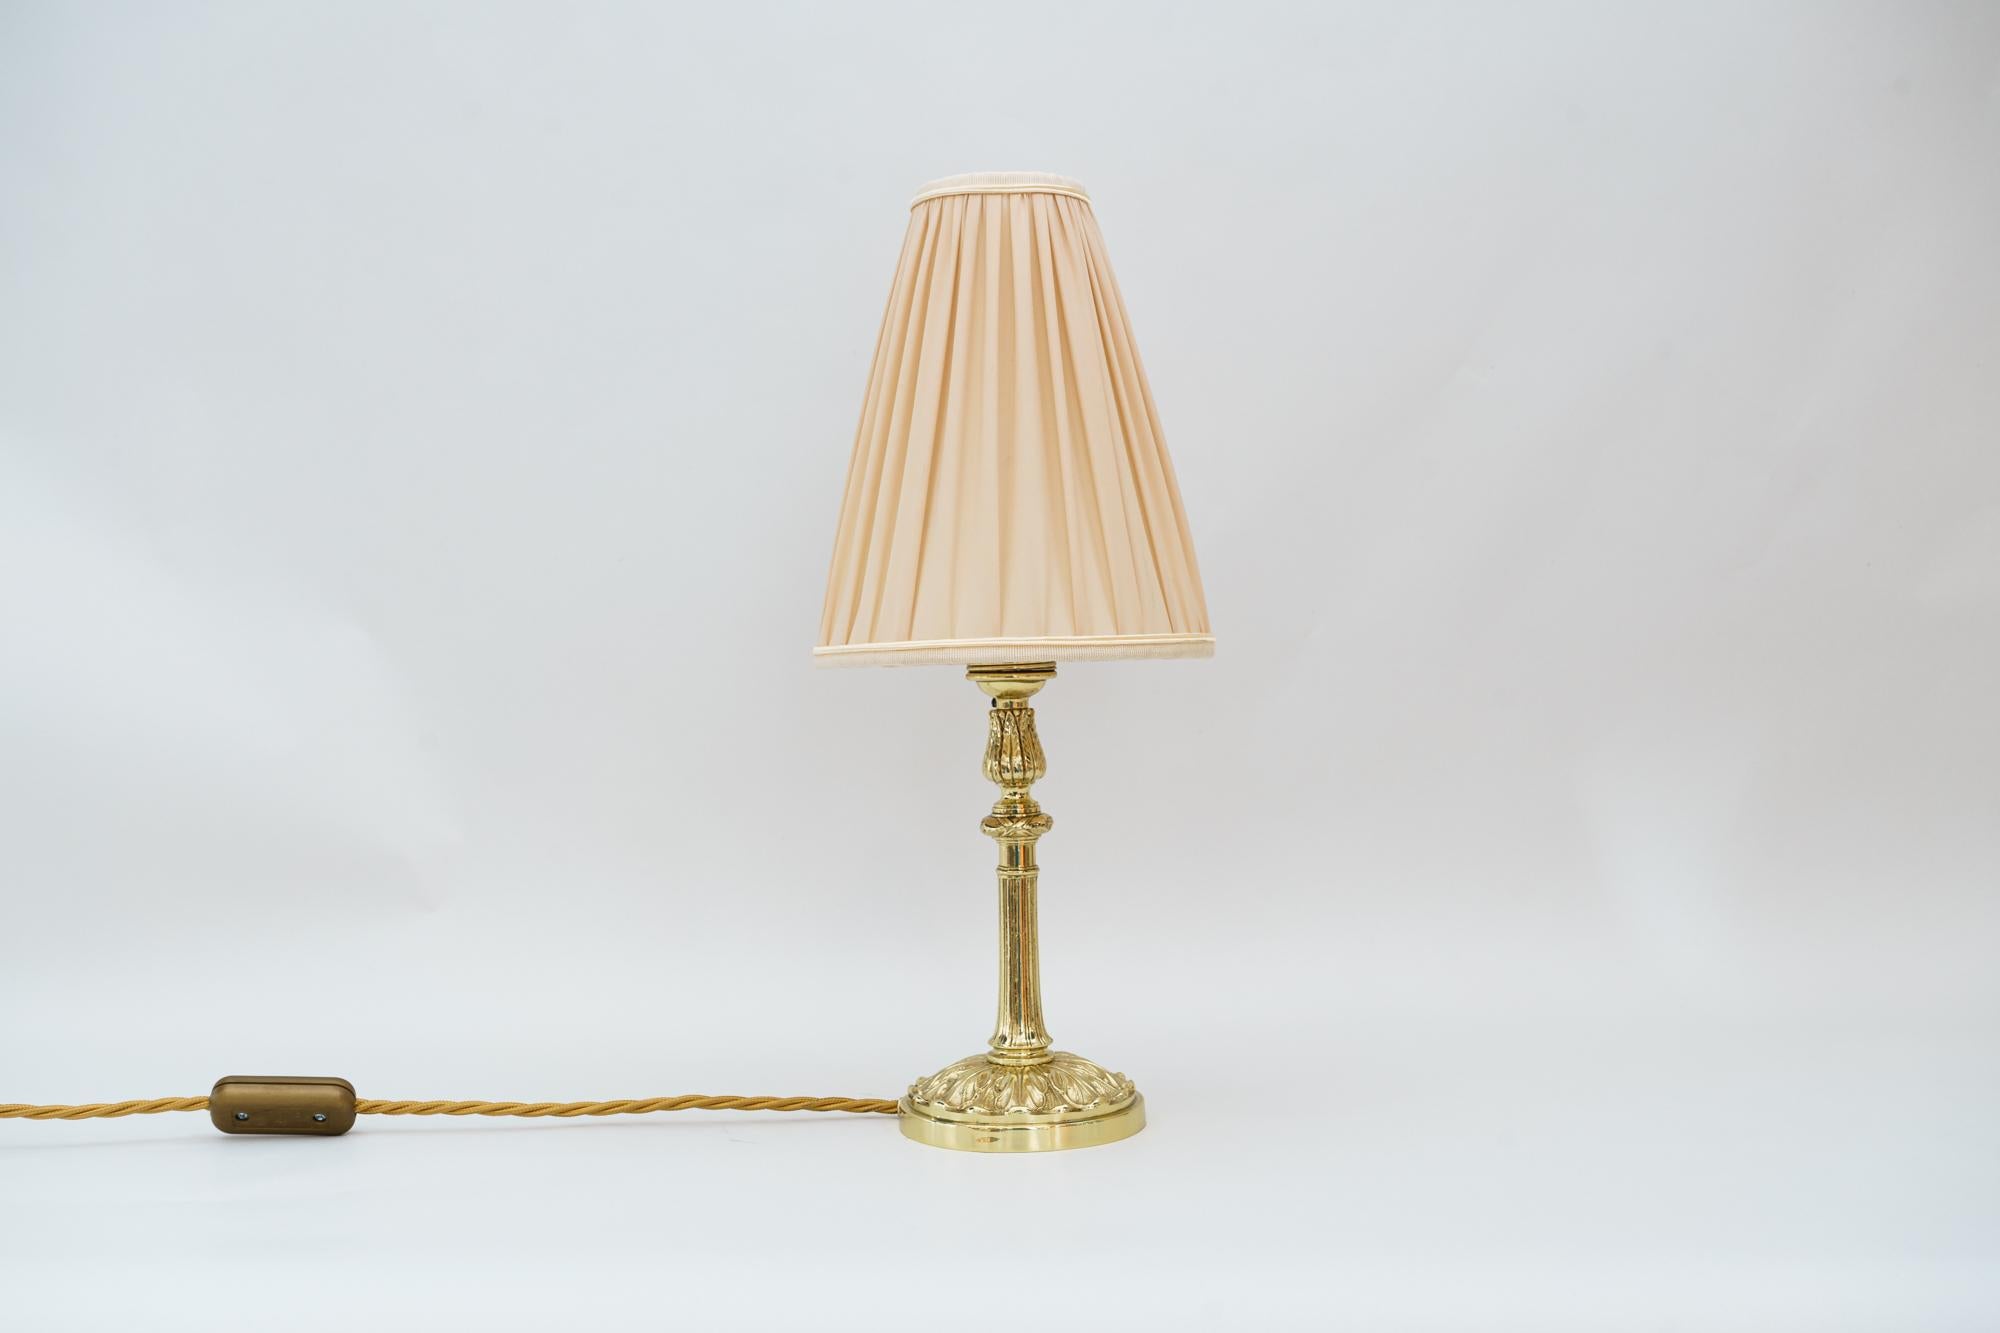 Art Deco table lamp, Vienna, circa 1920s
Polished and stove enameled.